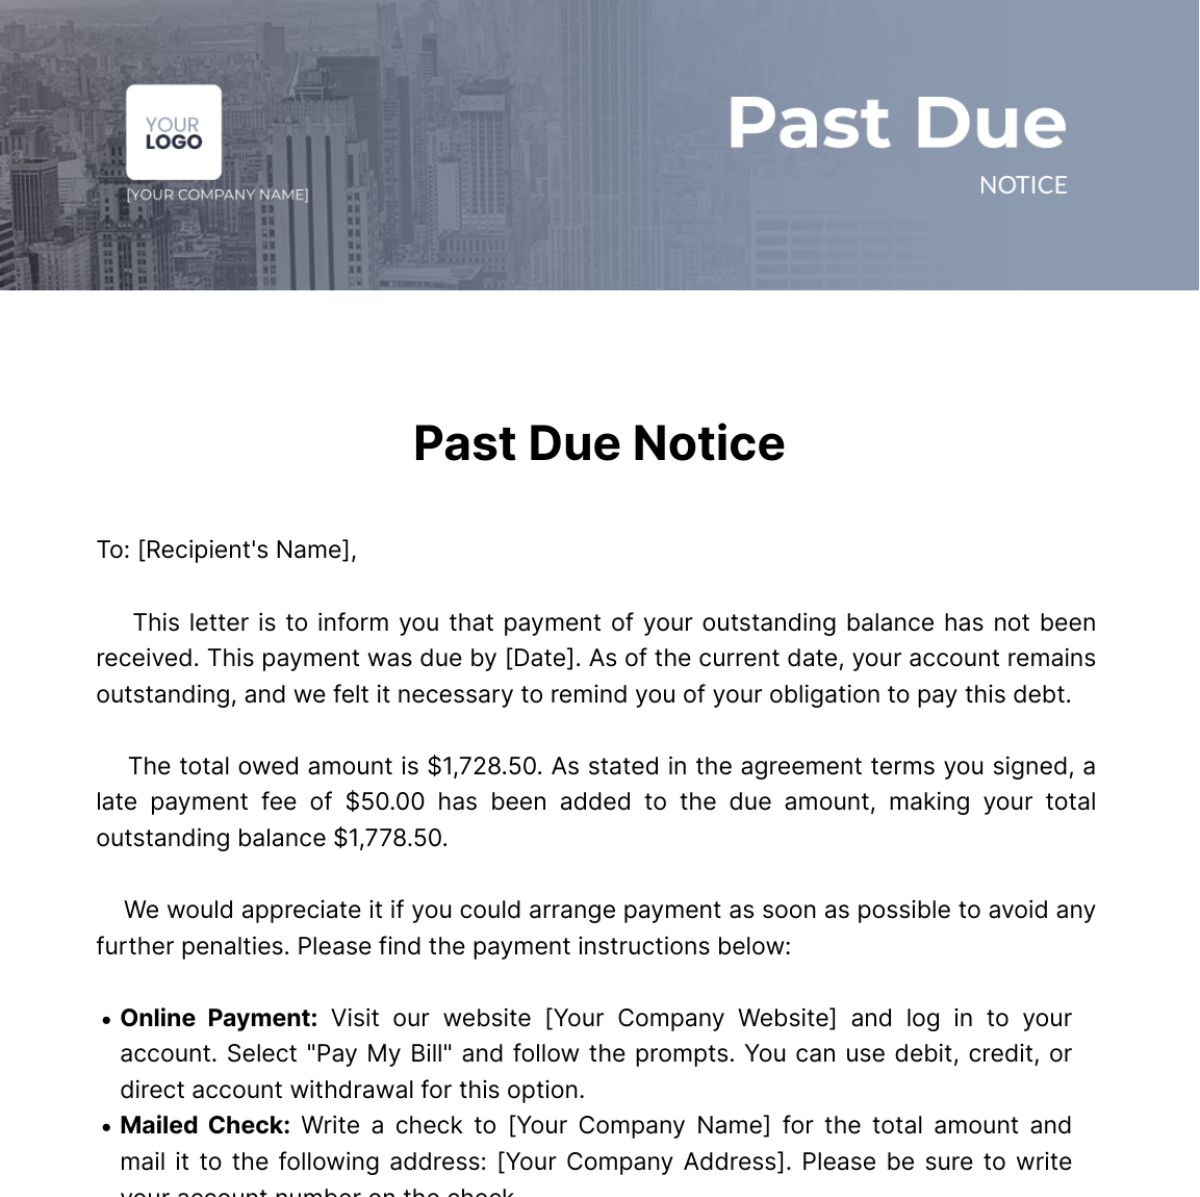 Past Due Notice Template